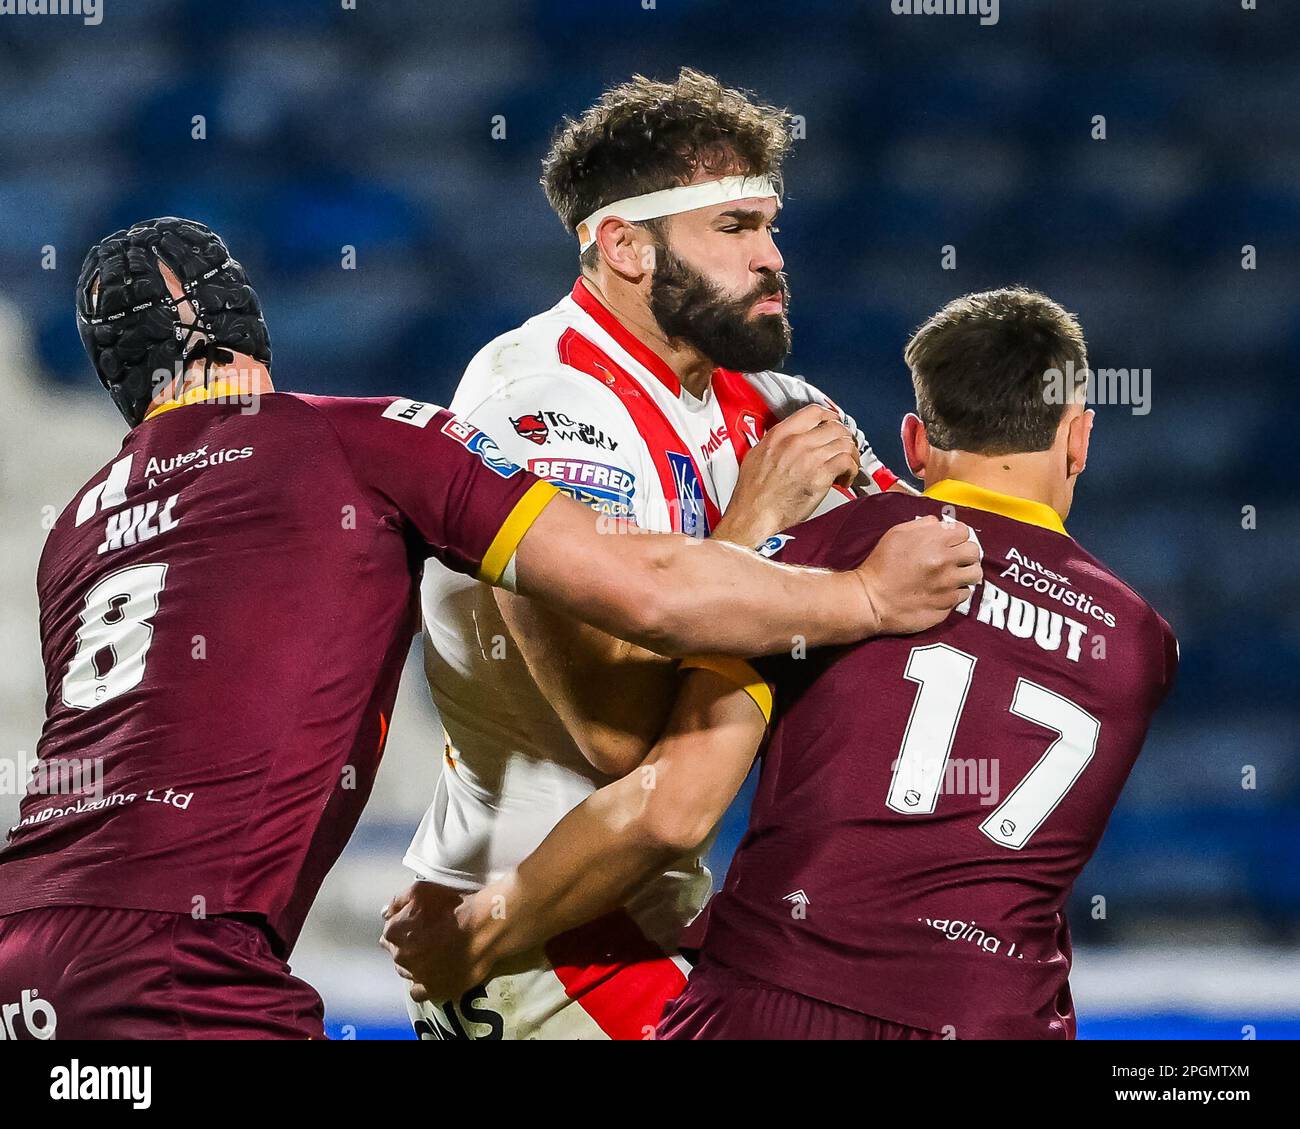 Alex Walmsley #8 of St Helens is tackled by Owen Trout #17 and Chris Hill #8 of Huddersfield Giants during the Betfred Super League Round 6 match Huddersfield Giants vs St Helens at John Smith's Stadium, Huddersfield, United Kingdom, 23rd March 2023  (Photo by Craig Thomas/News Images) Stock Photo